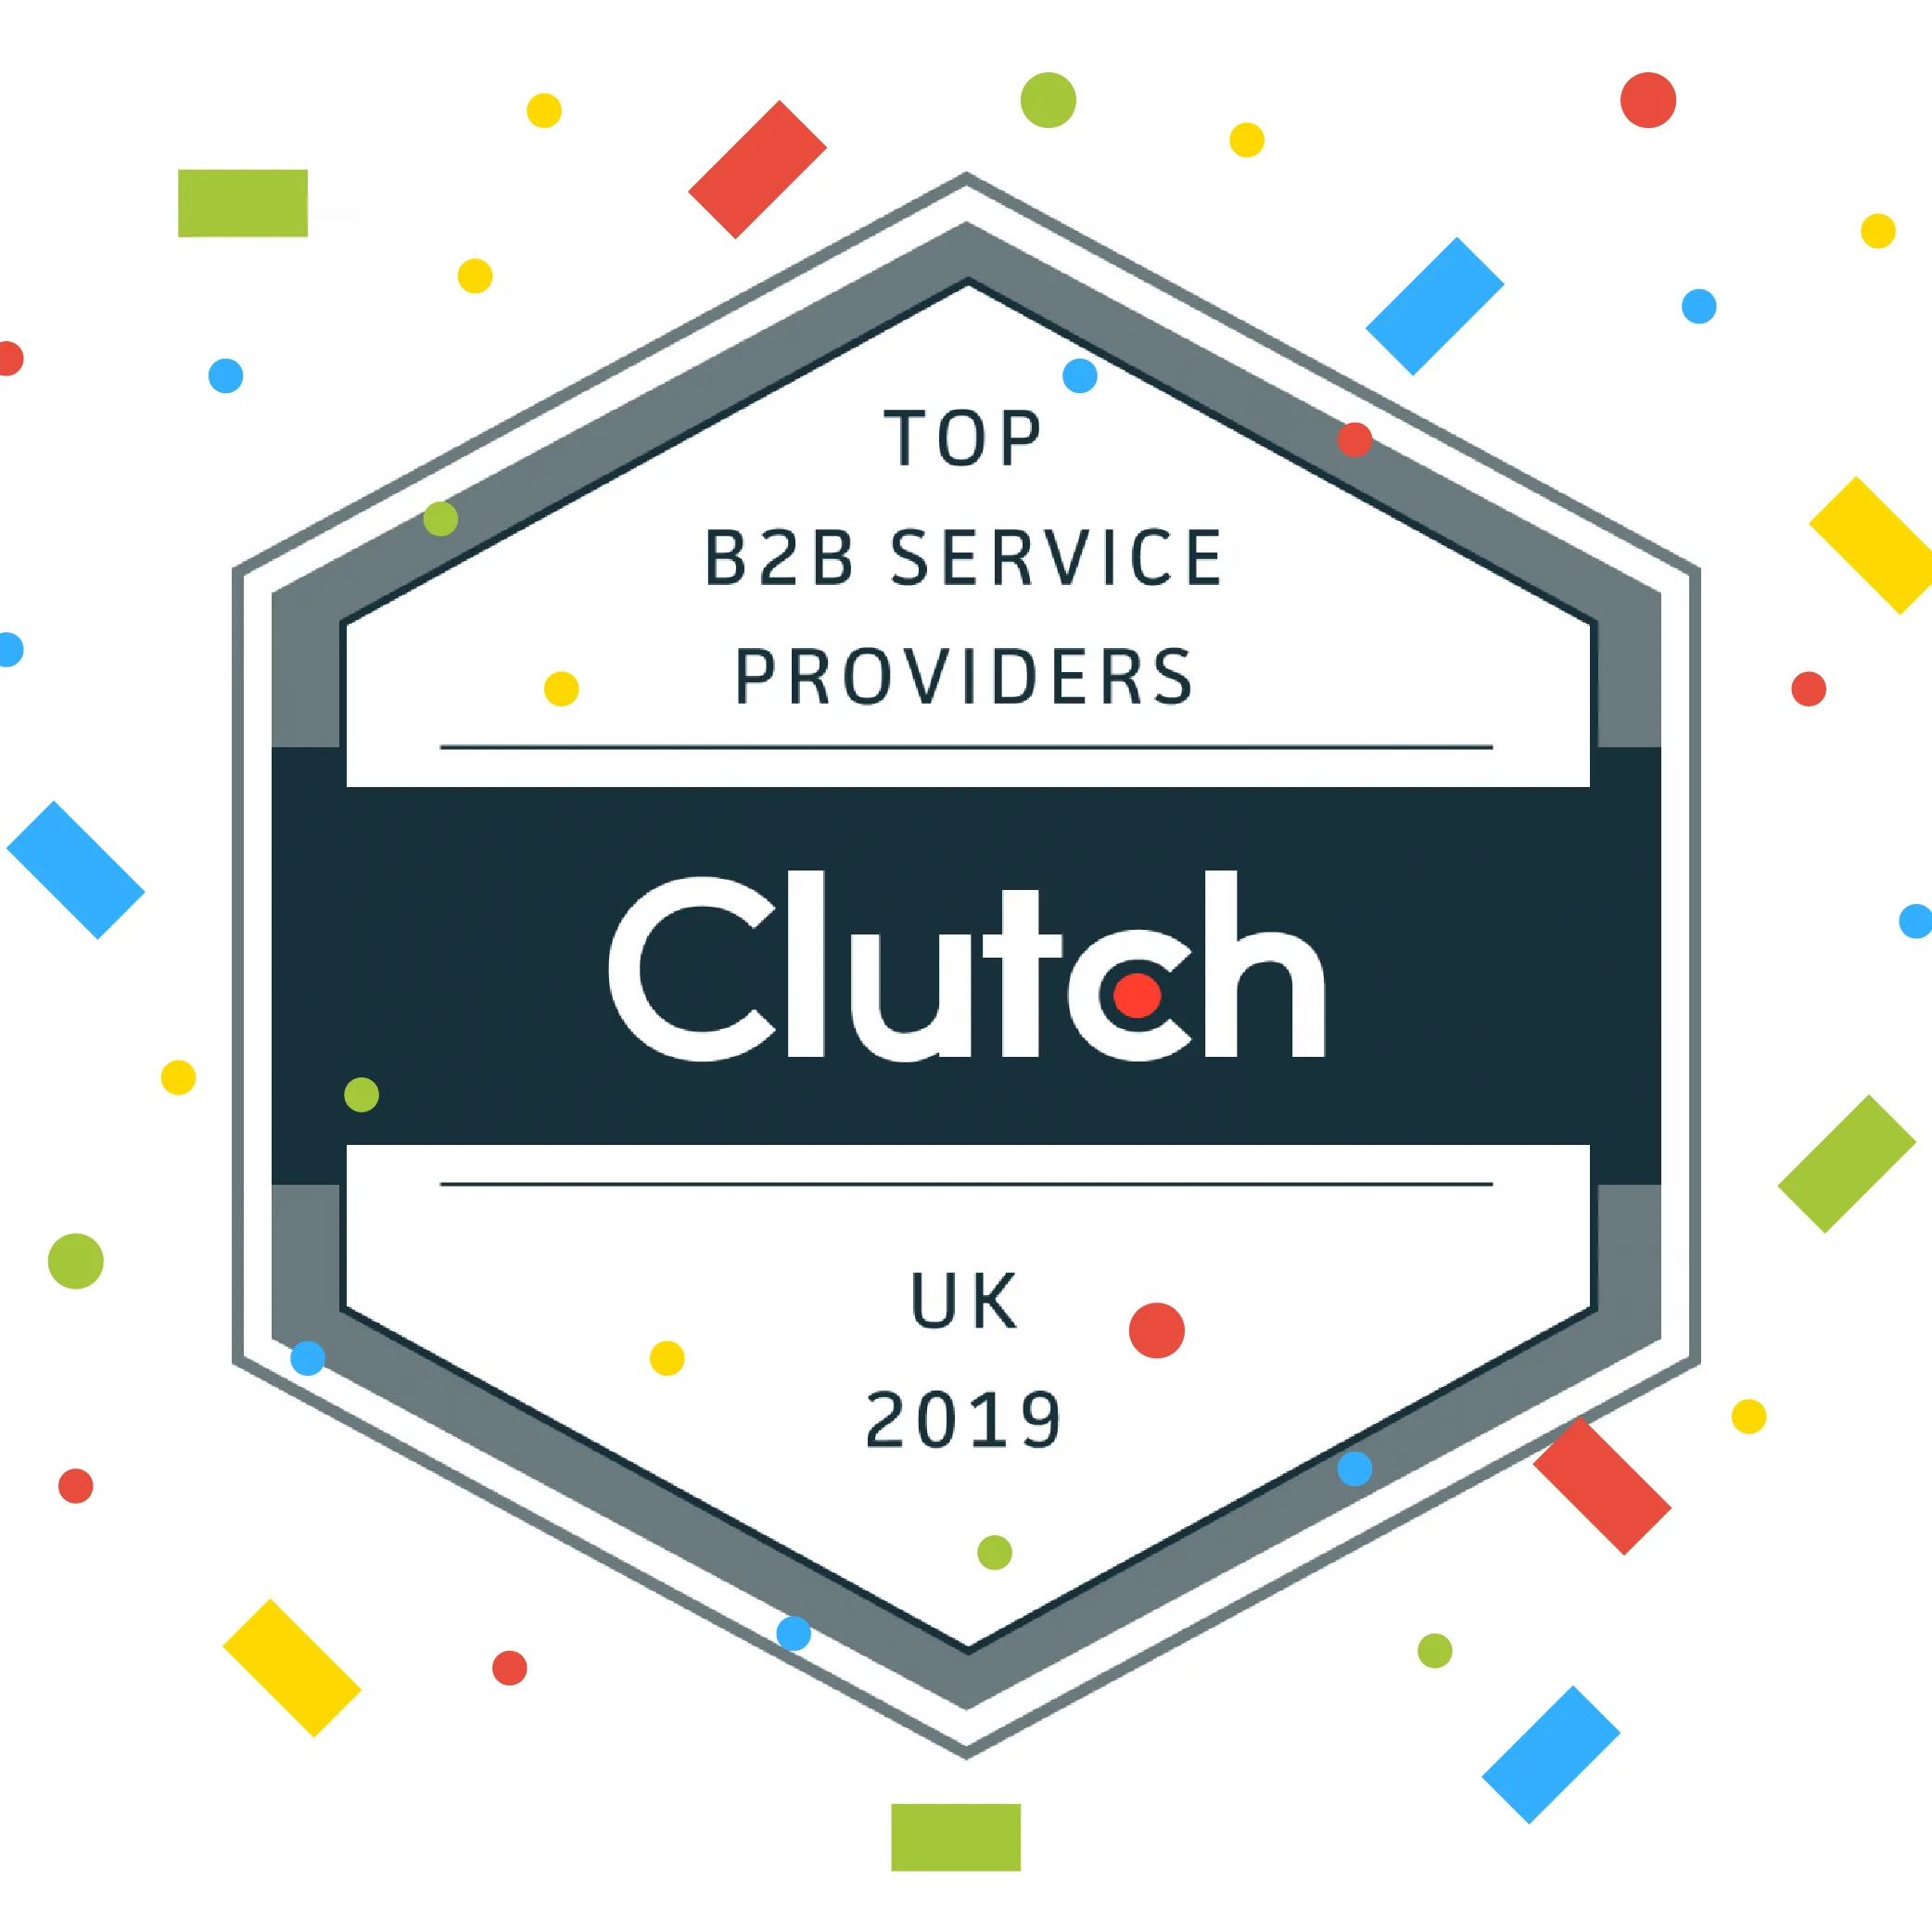 Cleveroad is one of the top B2B service provider in UK 2019